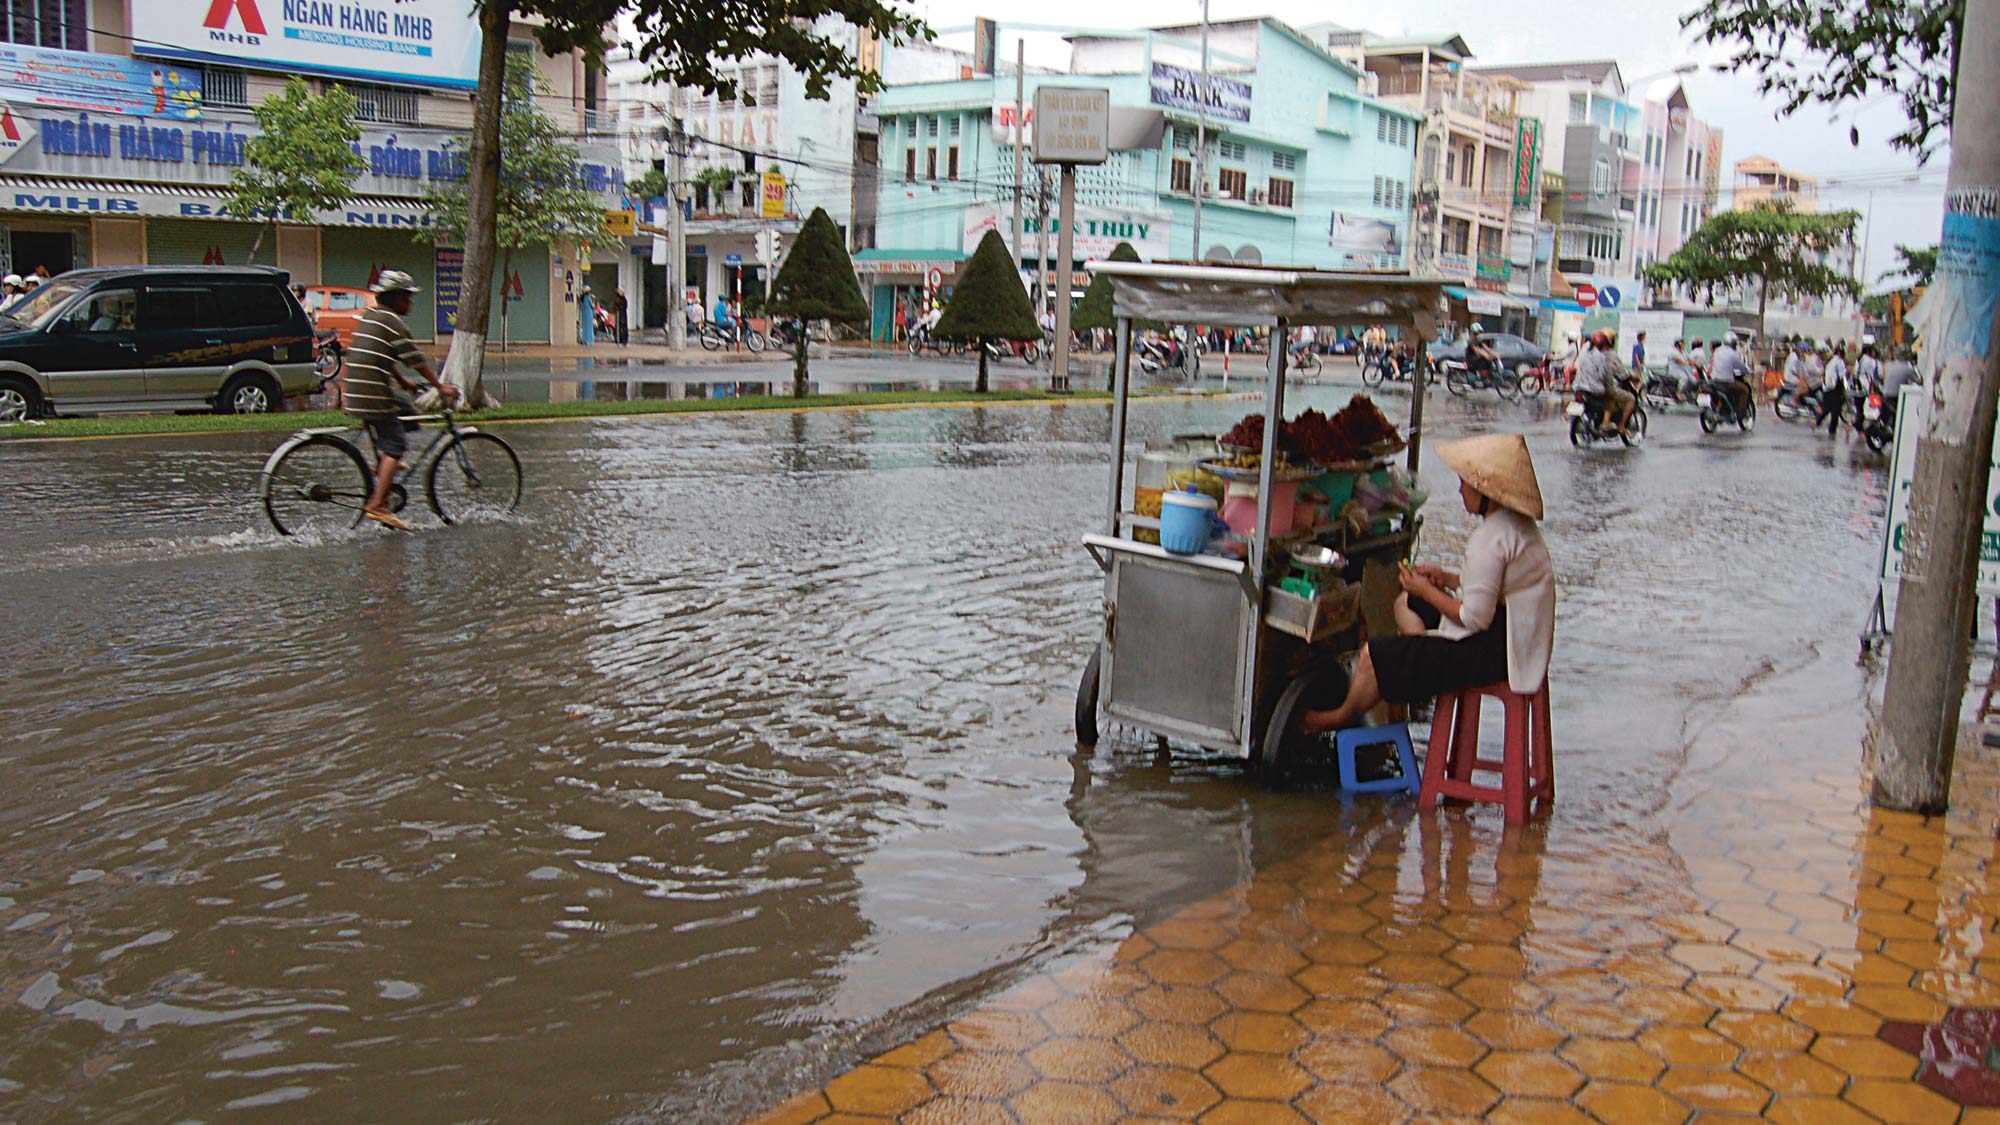 Flooded street scene with vendor in water